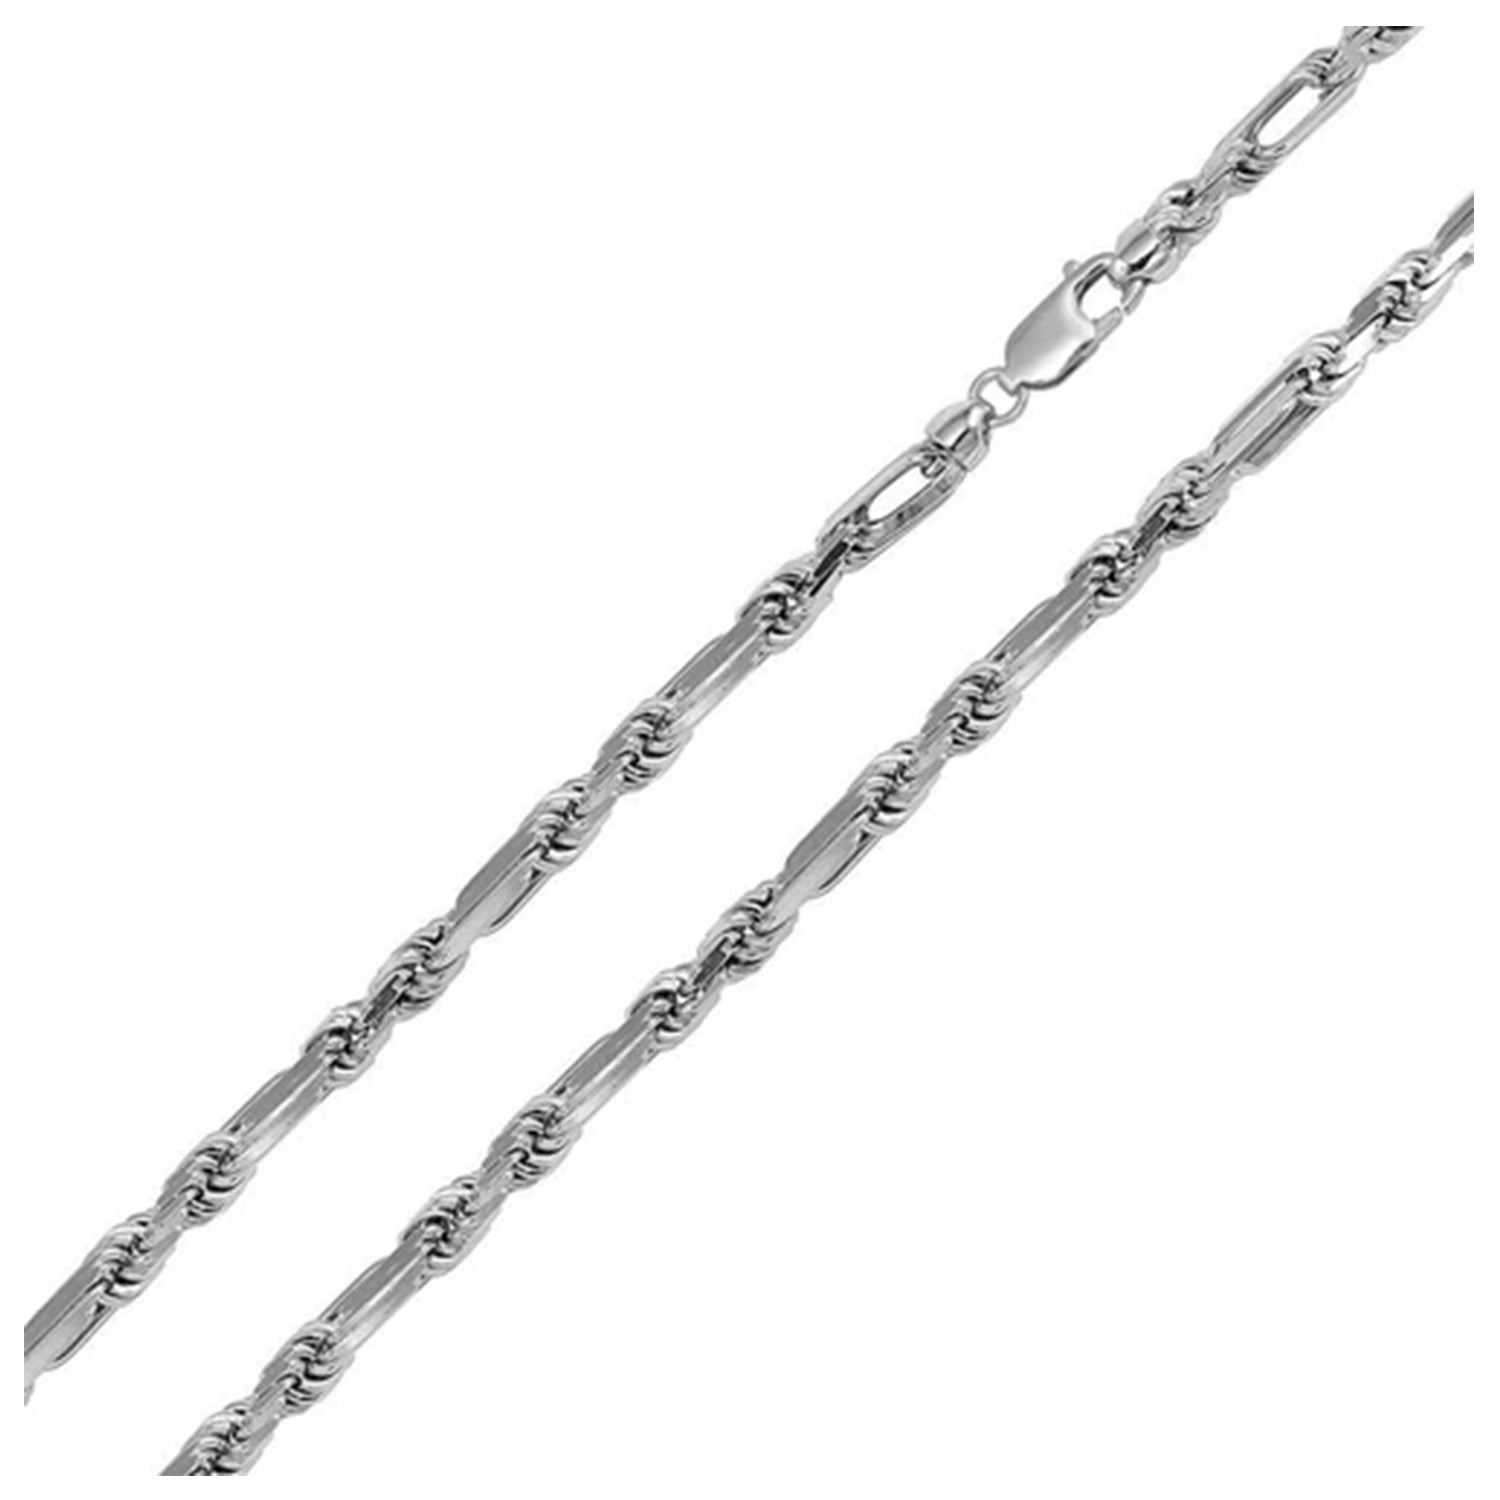 Sterling Silver 5.7 mm FigaRope Chain